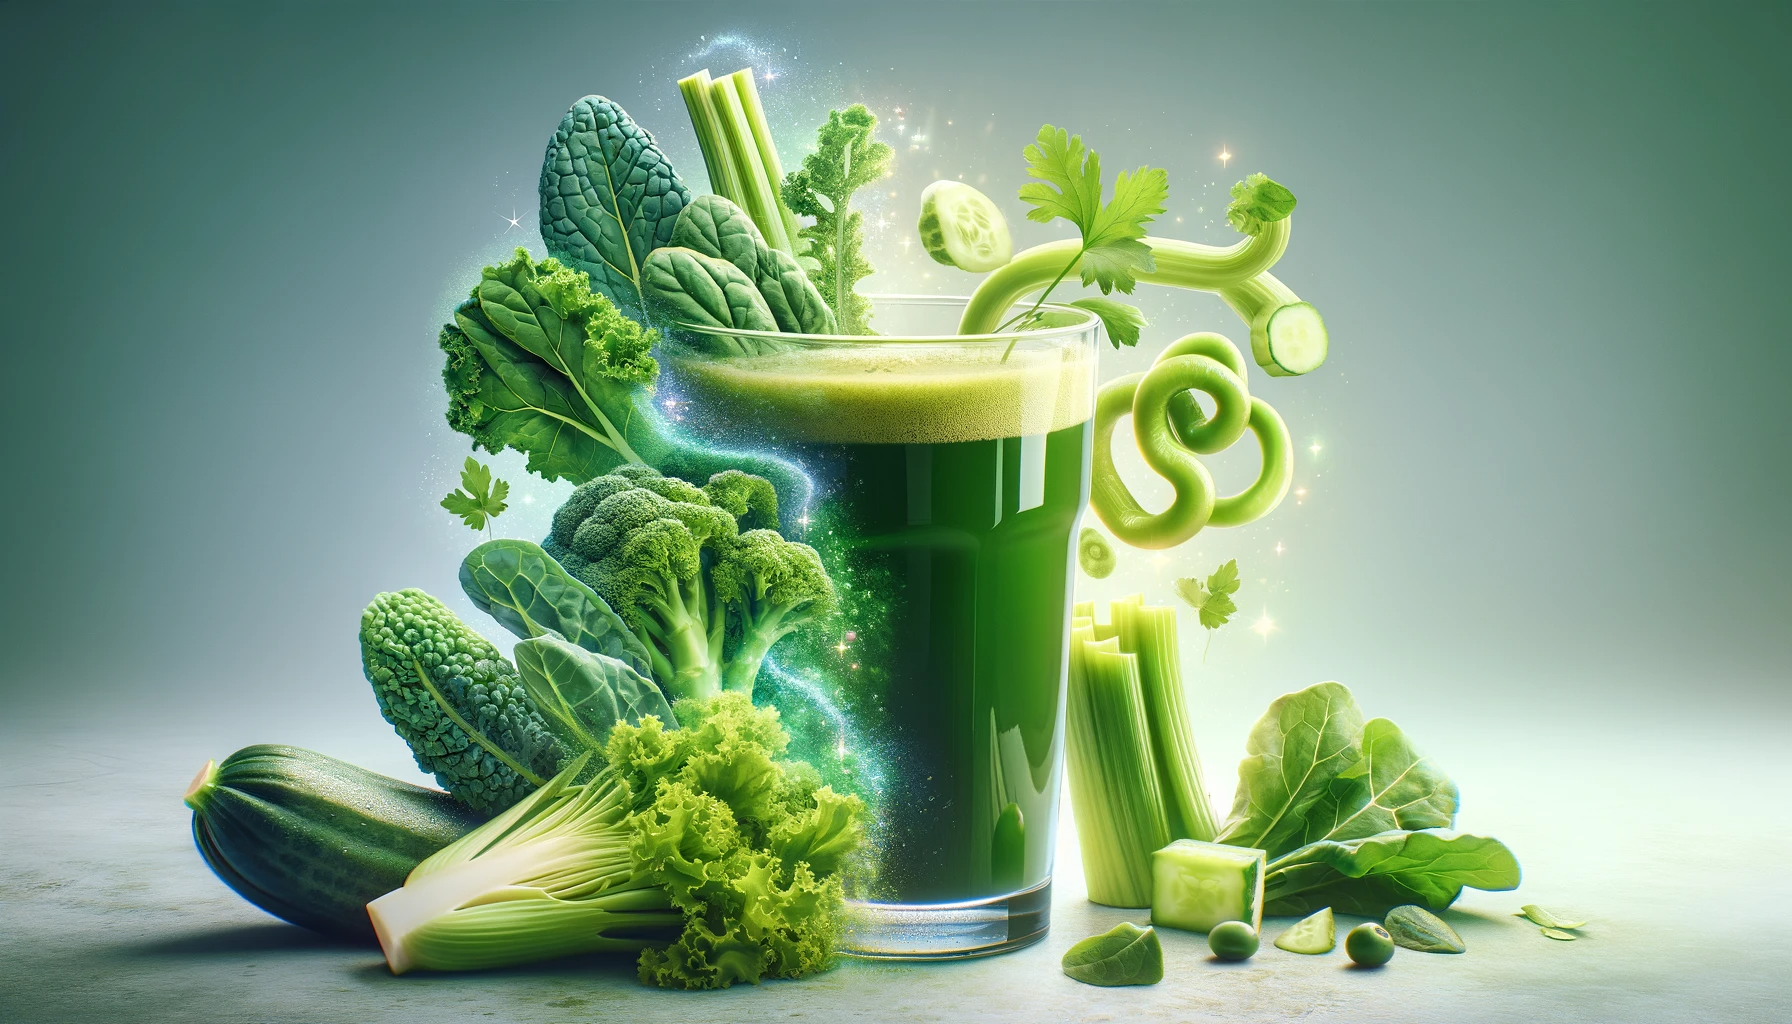 A bright and inviting image displaying an array of green vegetables such as kale, spinach, and celery being juiced, symbolizing the digestive health benefits of consuming green juice, with visual hints of gut health and detoxification.